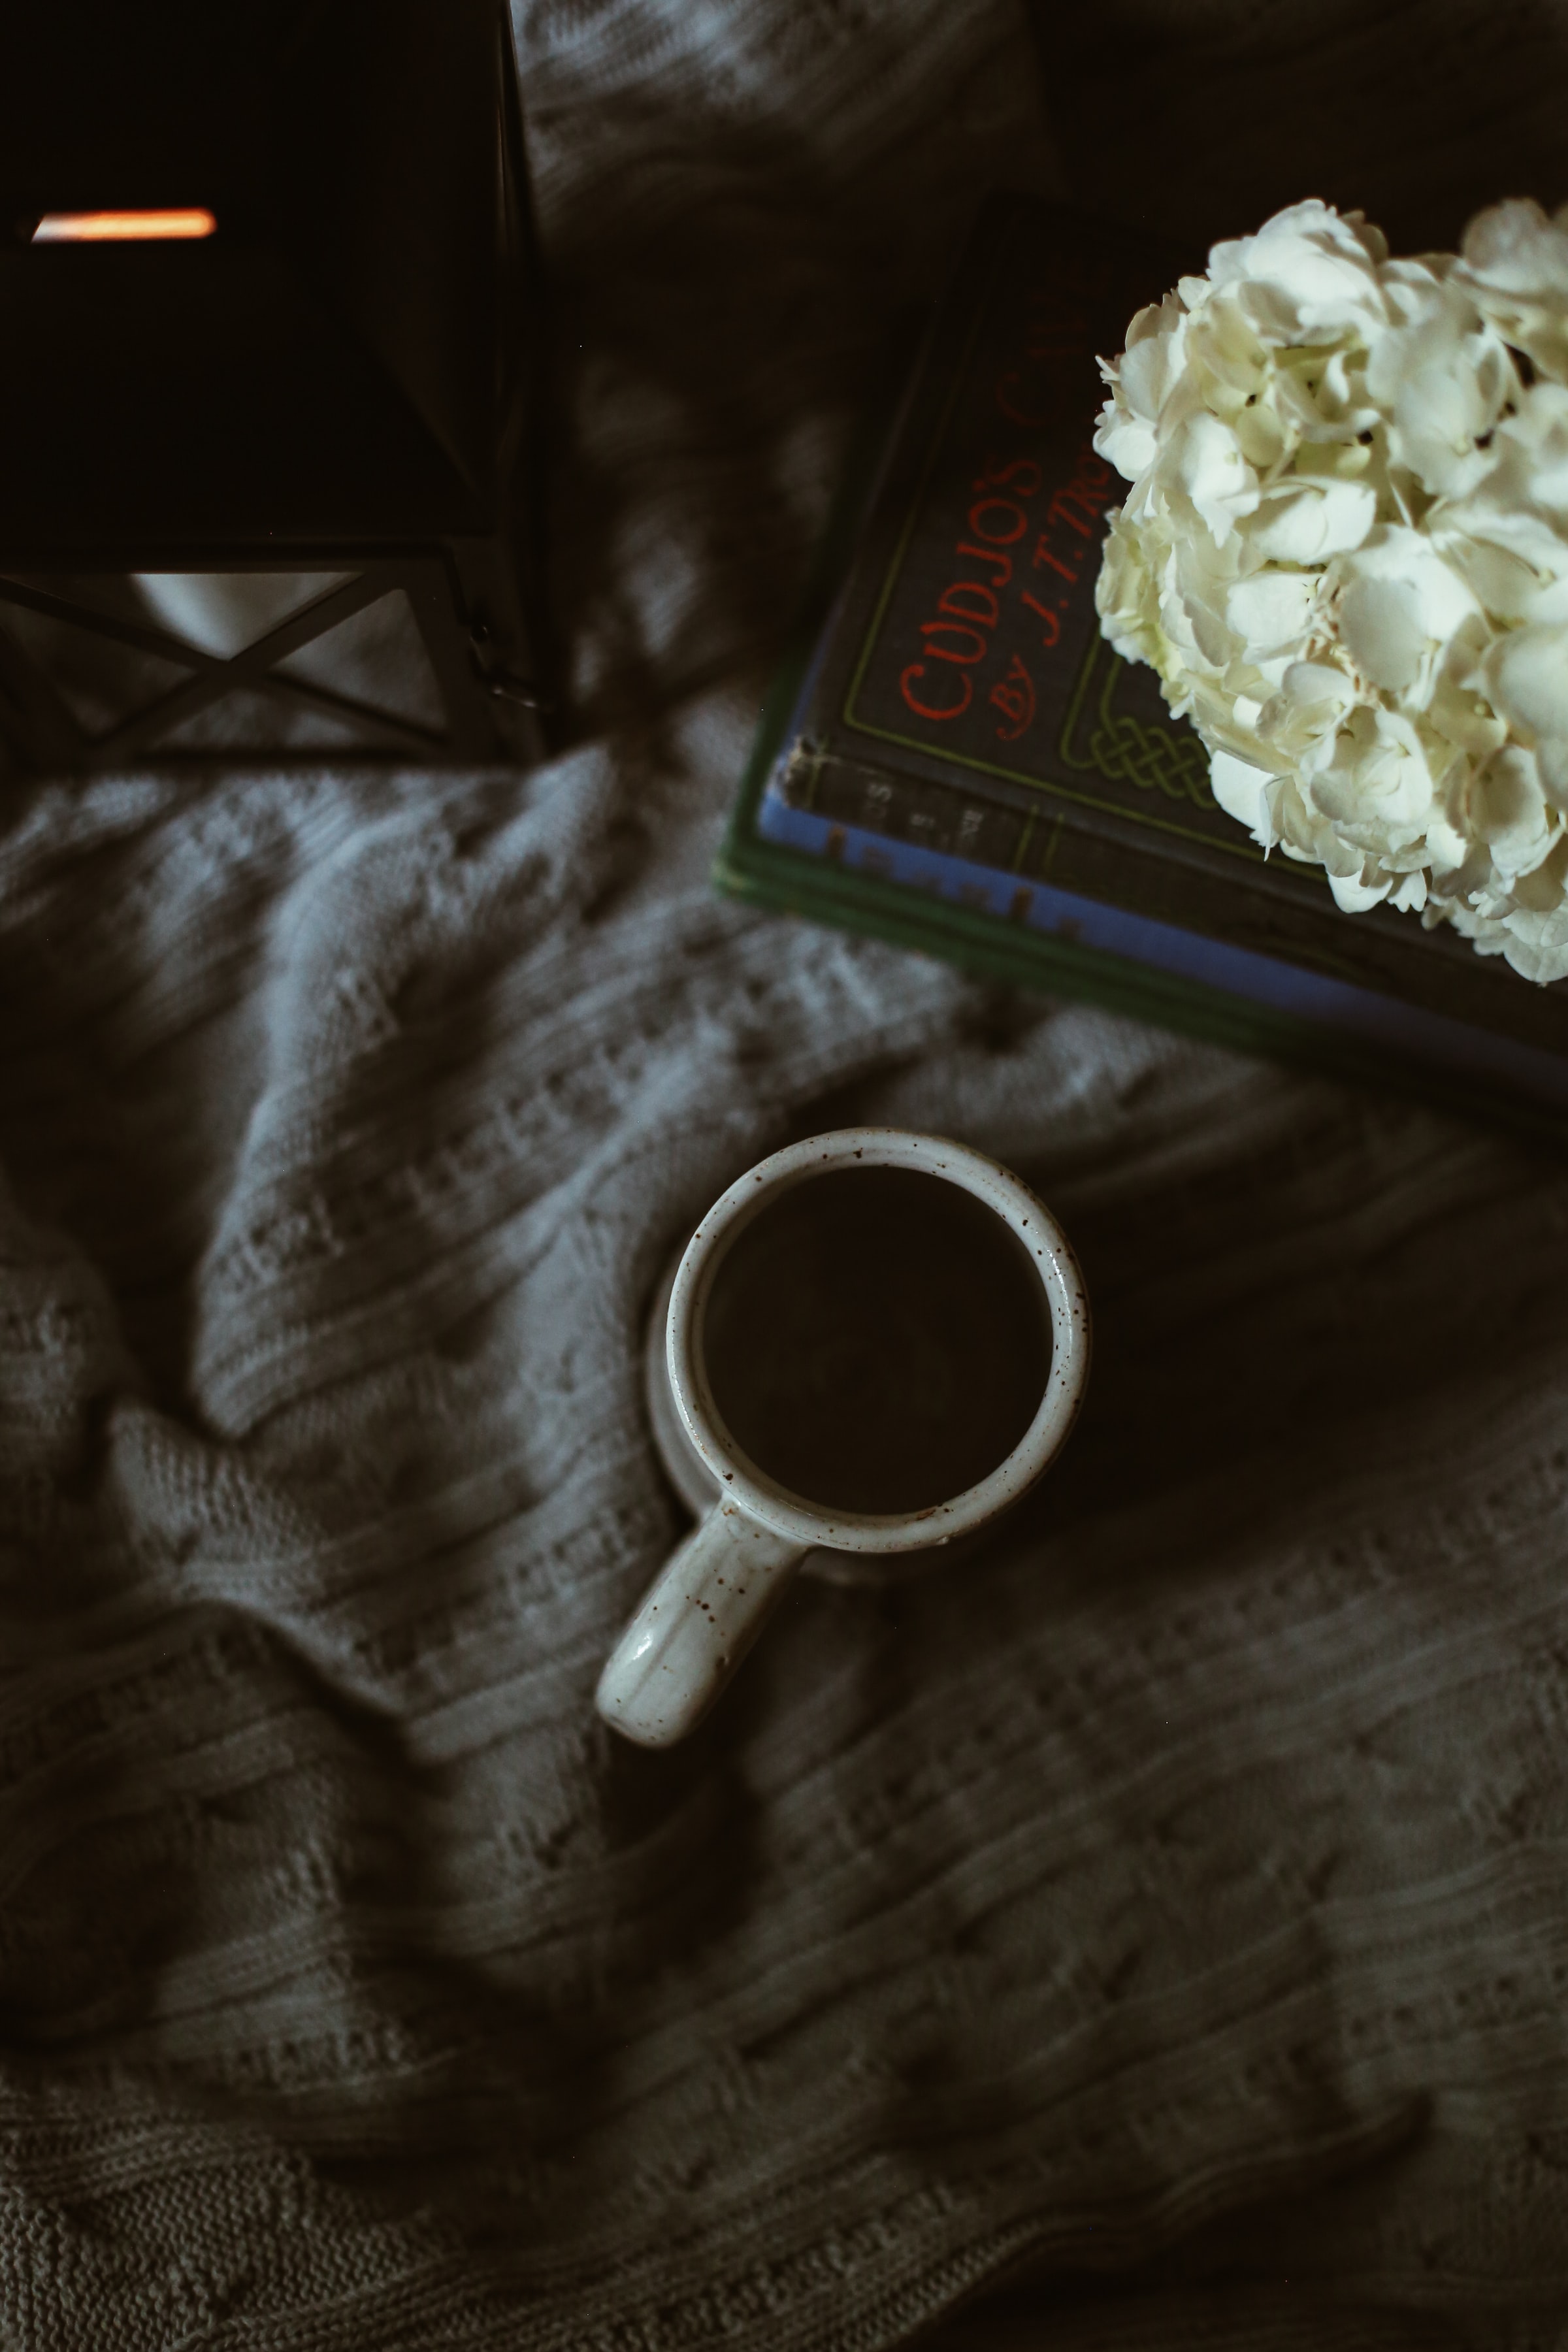 flowers, coffee, miscellanea, miscellaneous, cup, cloth, book